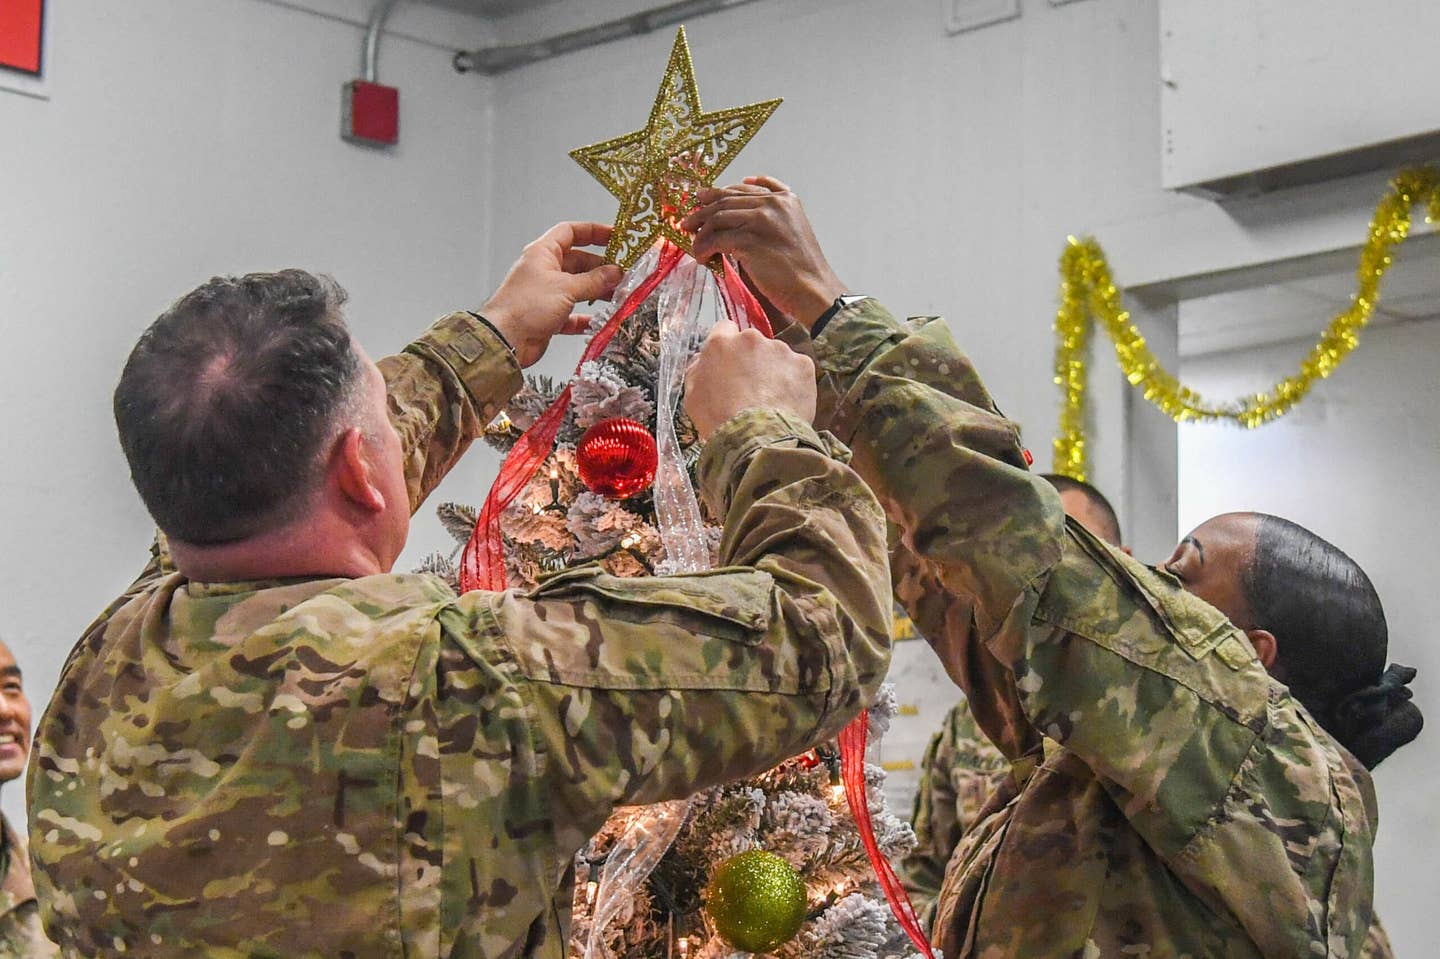 Task Force Destiny Soldiers bring the holiday cheer and spirit as they set up a Christmas tree for the TF Destiny building at Bagram Airfield, Afghanistan Dec. 6, 2018.